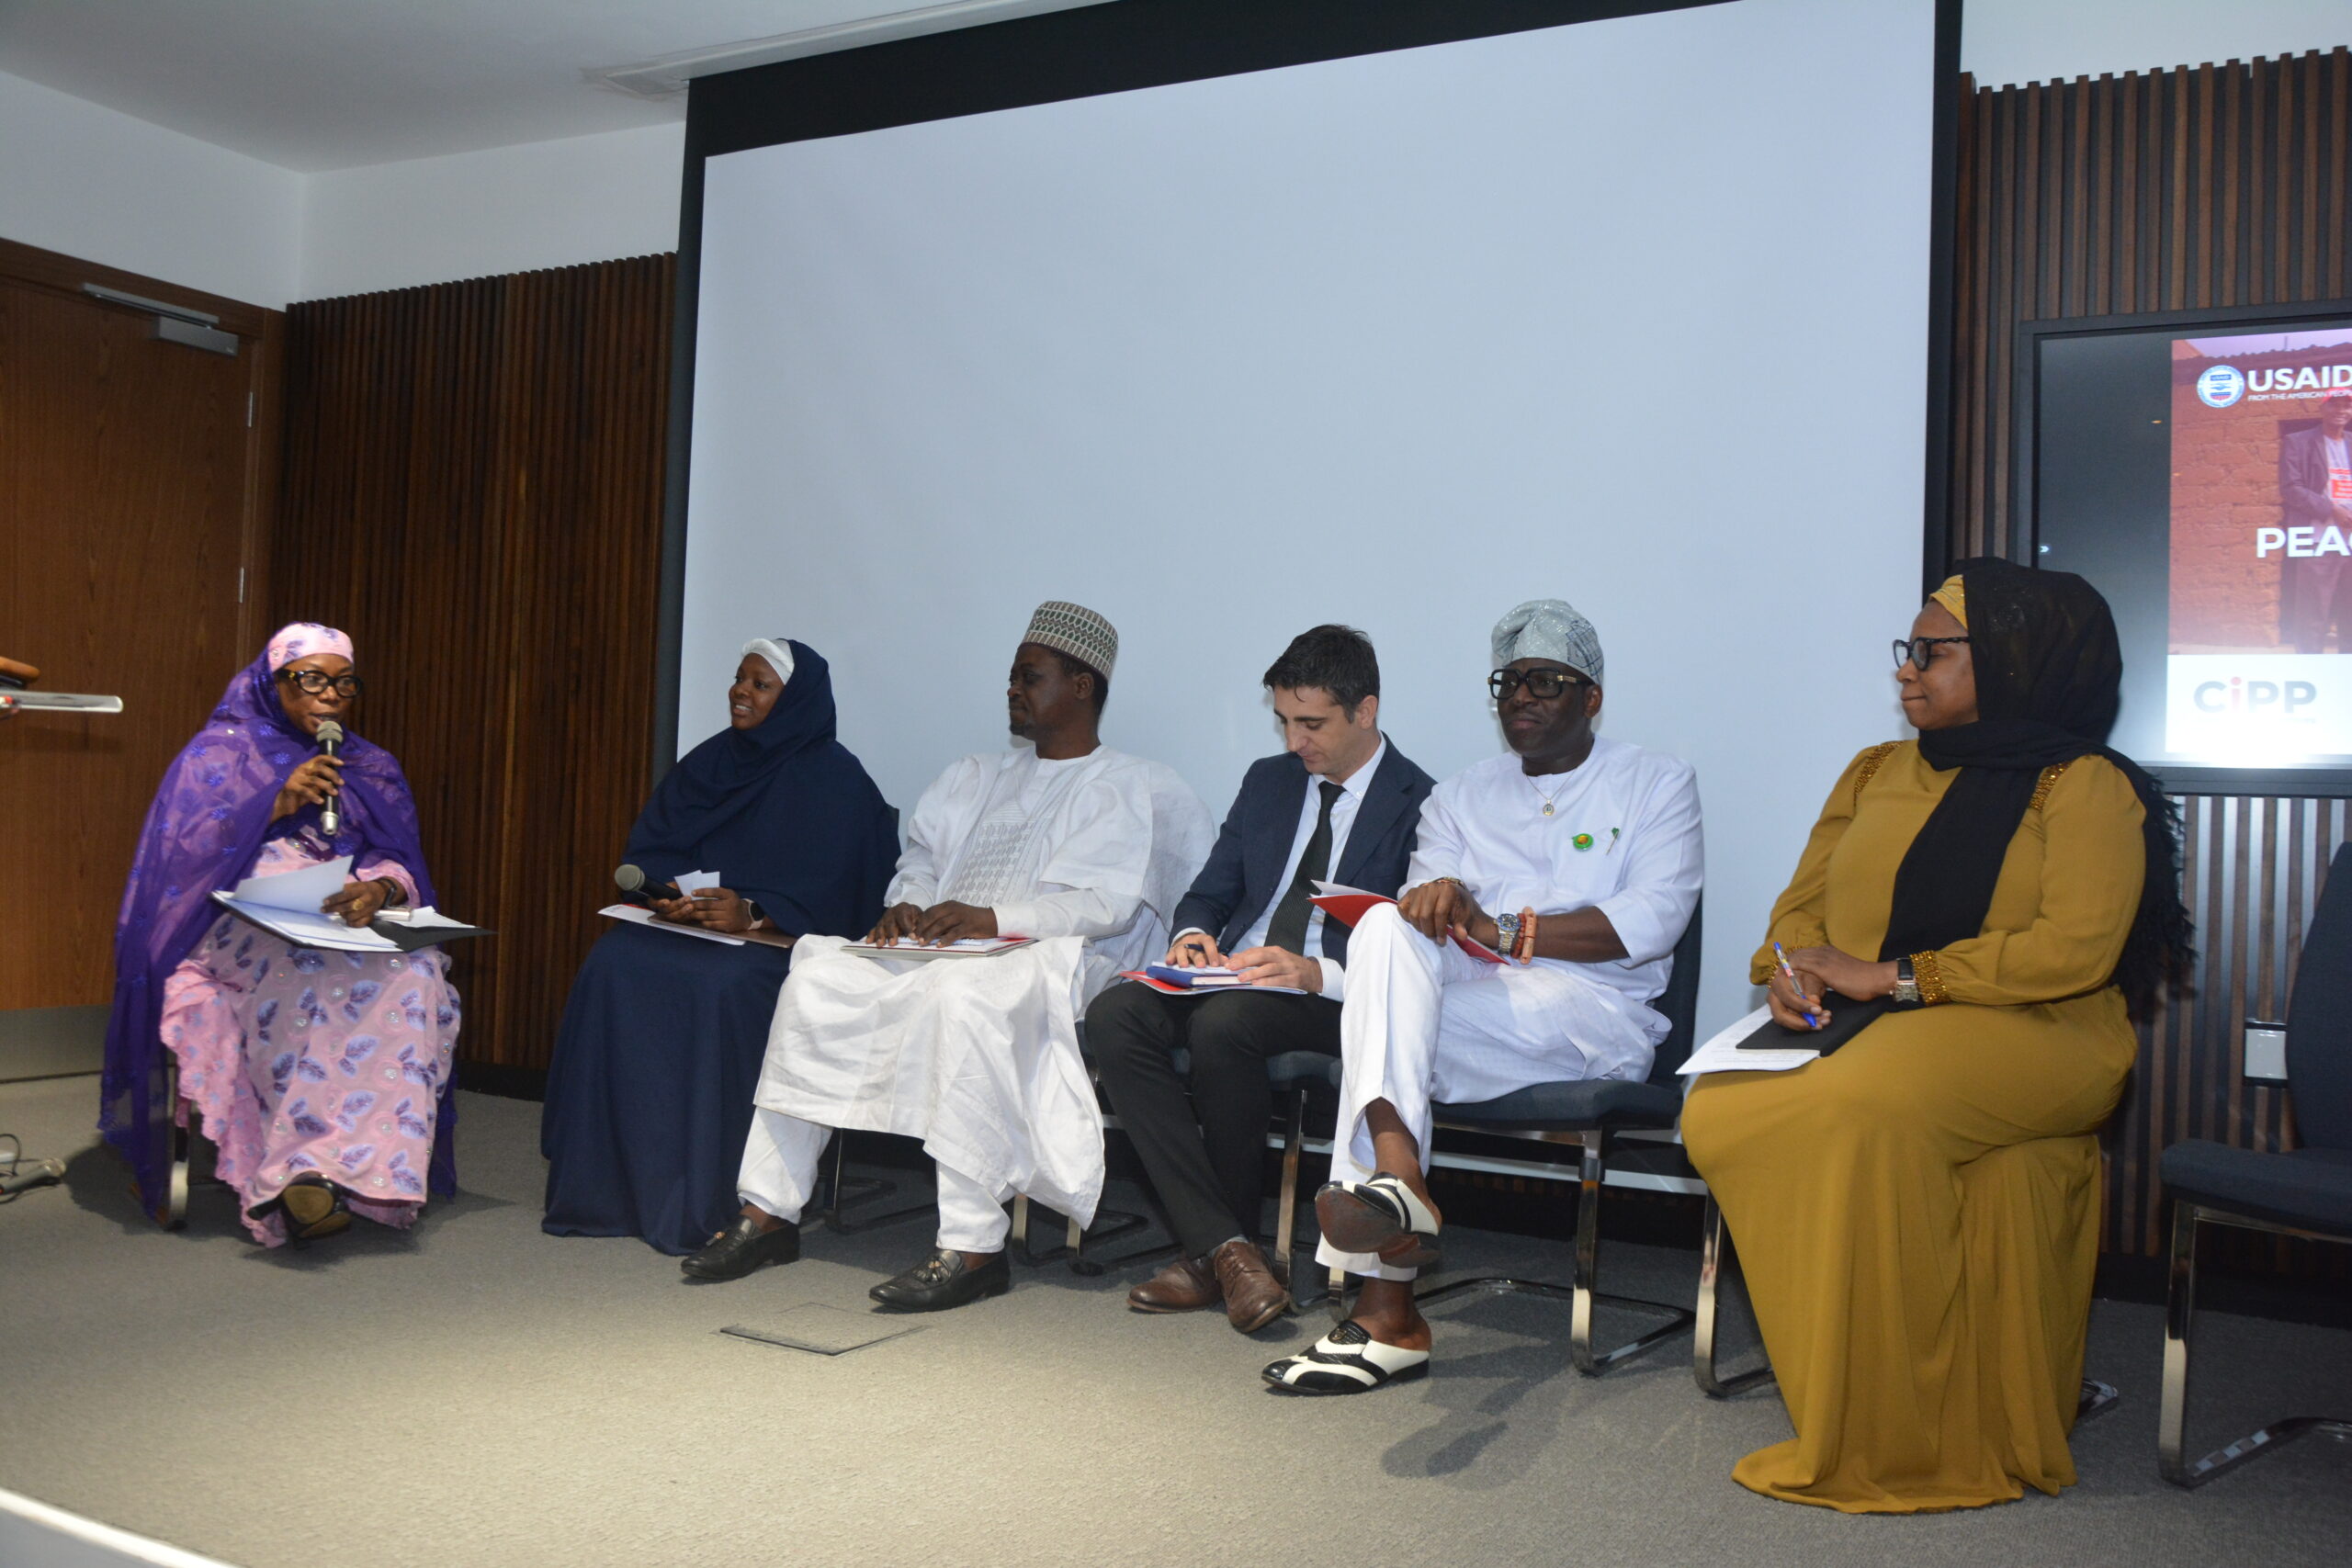 Director PCVE at the NCTC, Amb. Mairo Musa Abbas (left) with the panelists during one of the sessions at the Summit.